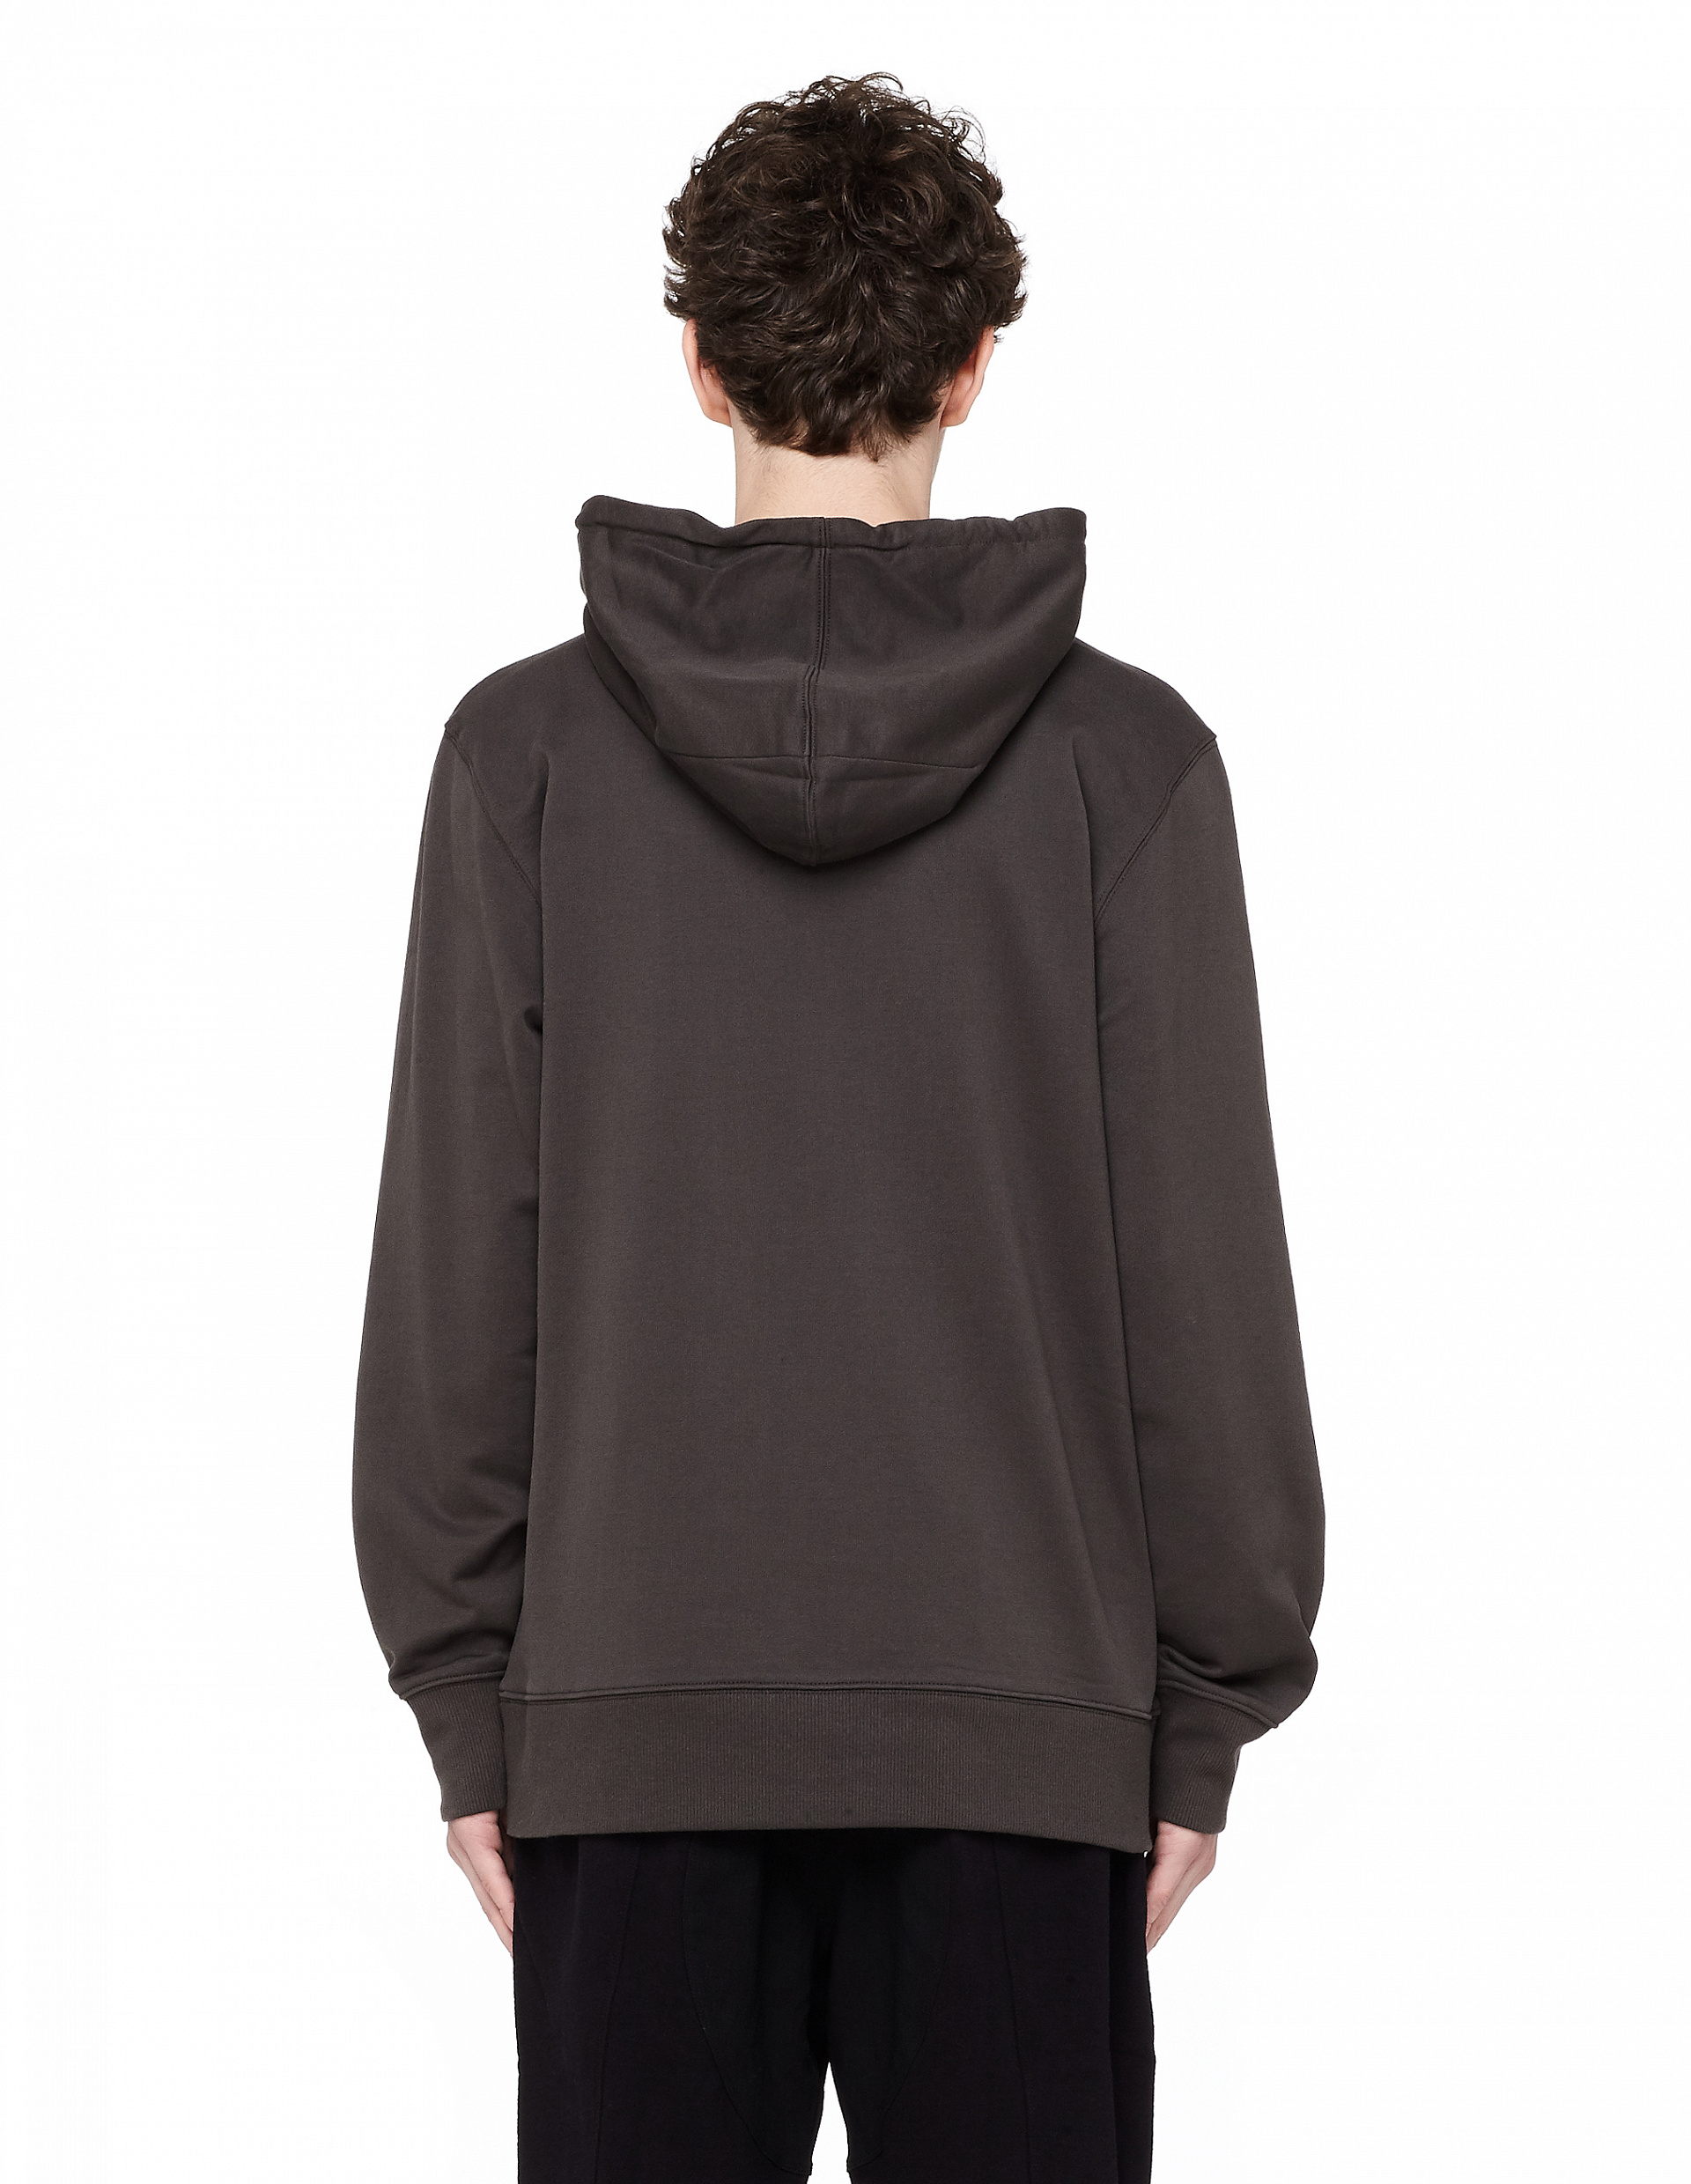 Buy Y-3 men grey cotton logo hoodie for $103 online on SVMOSCOW, CF0468